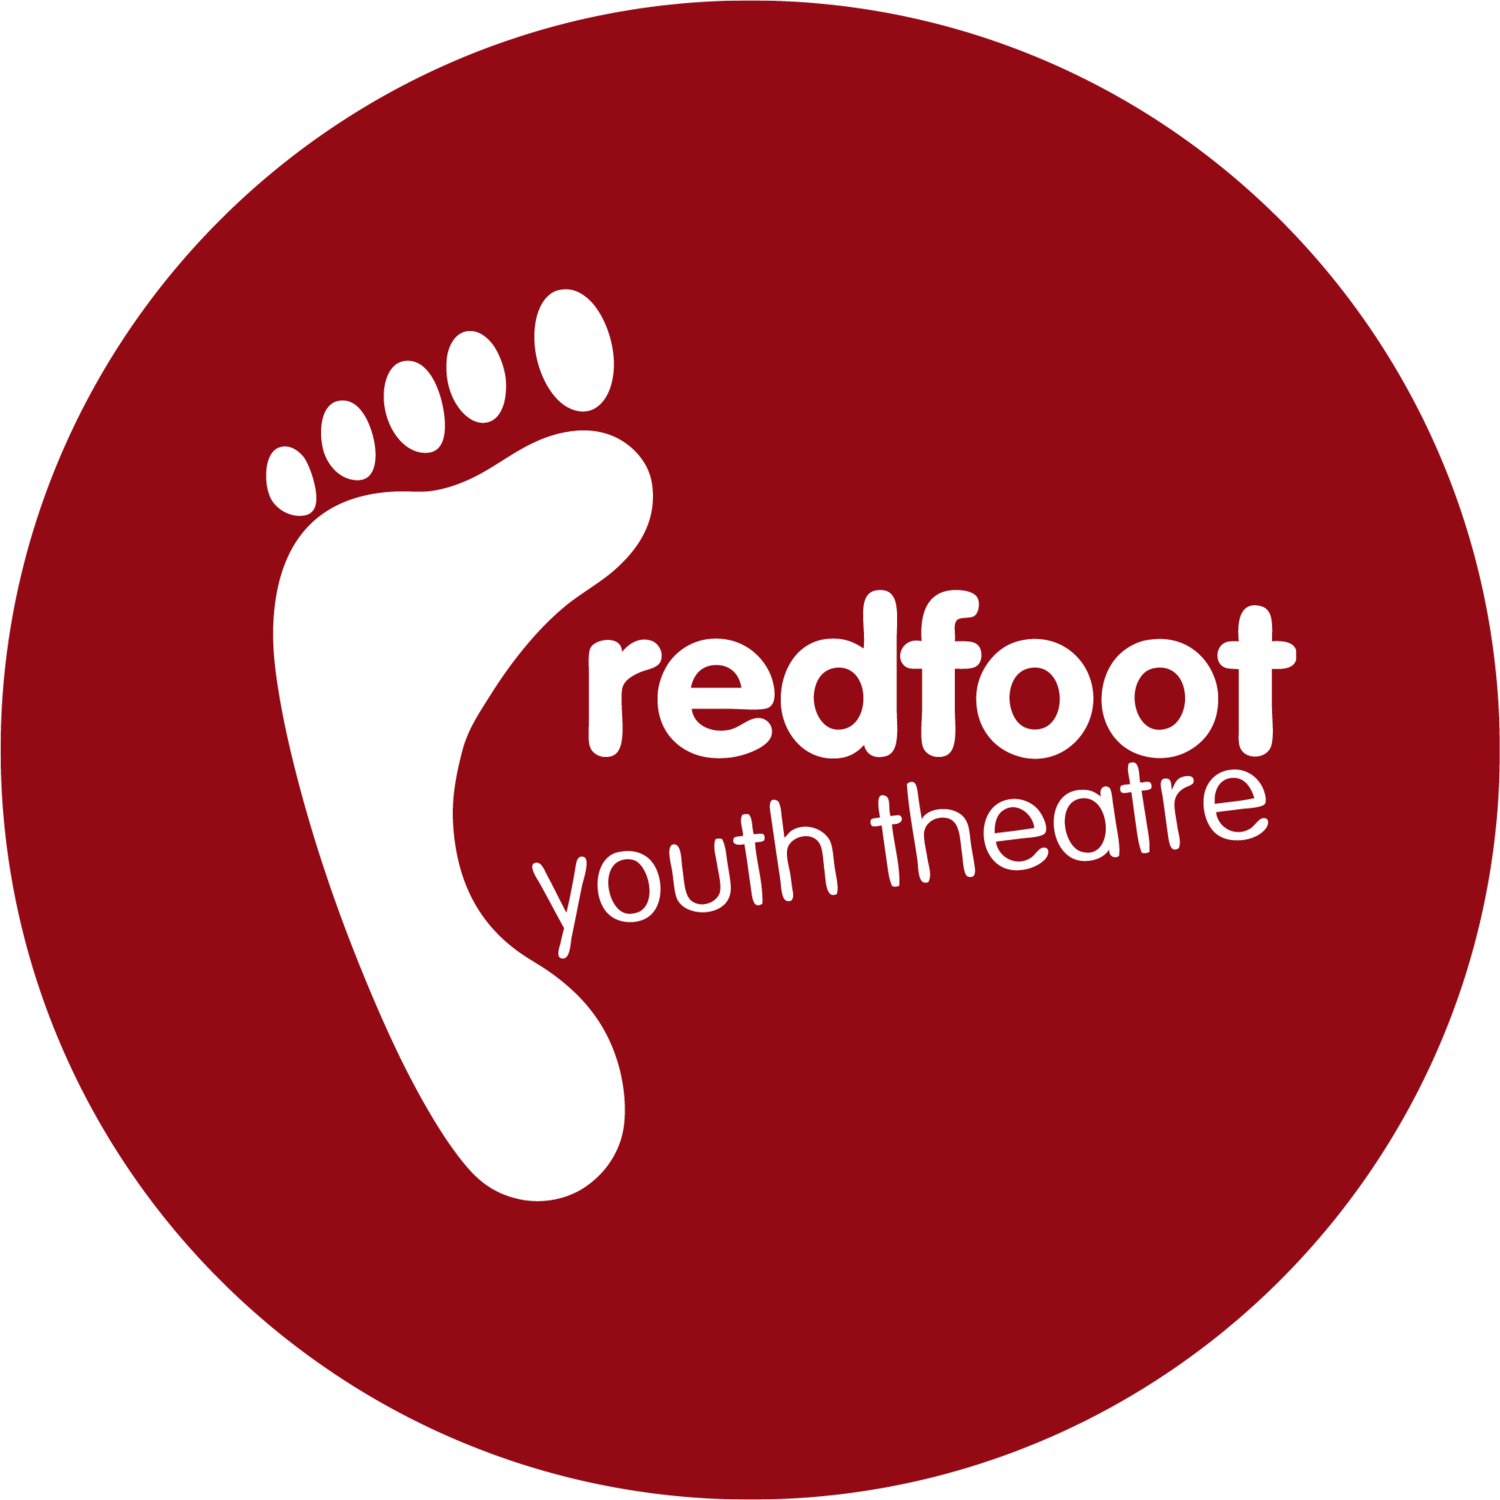 redfoot youth theatre